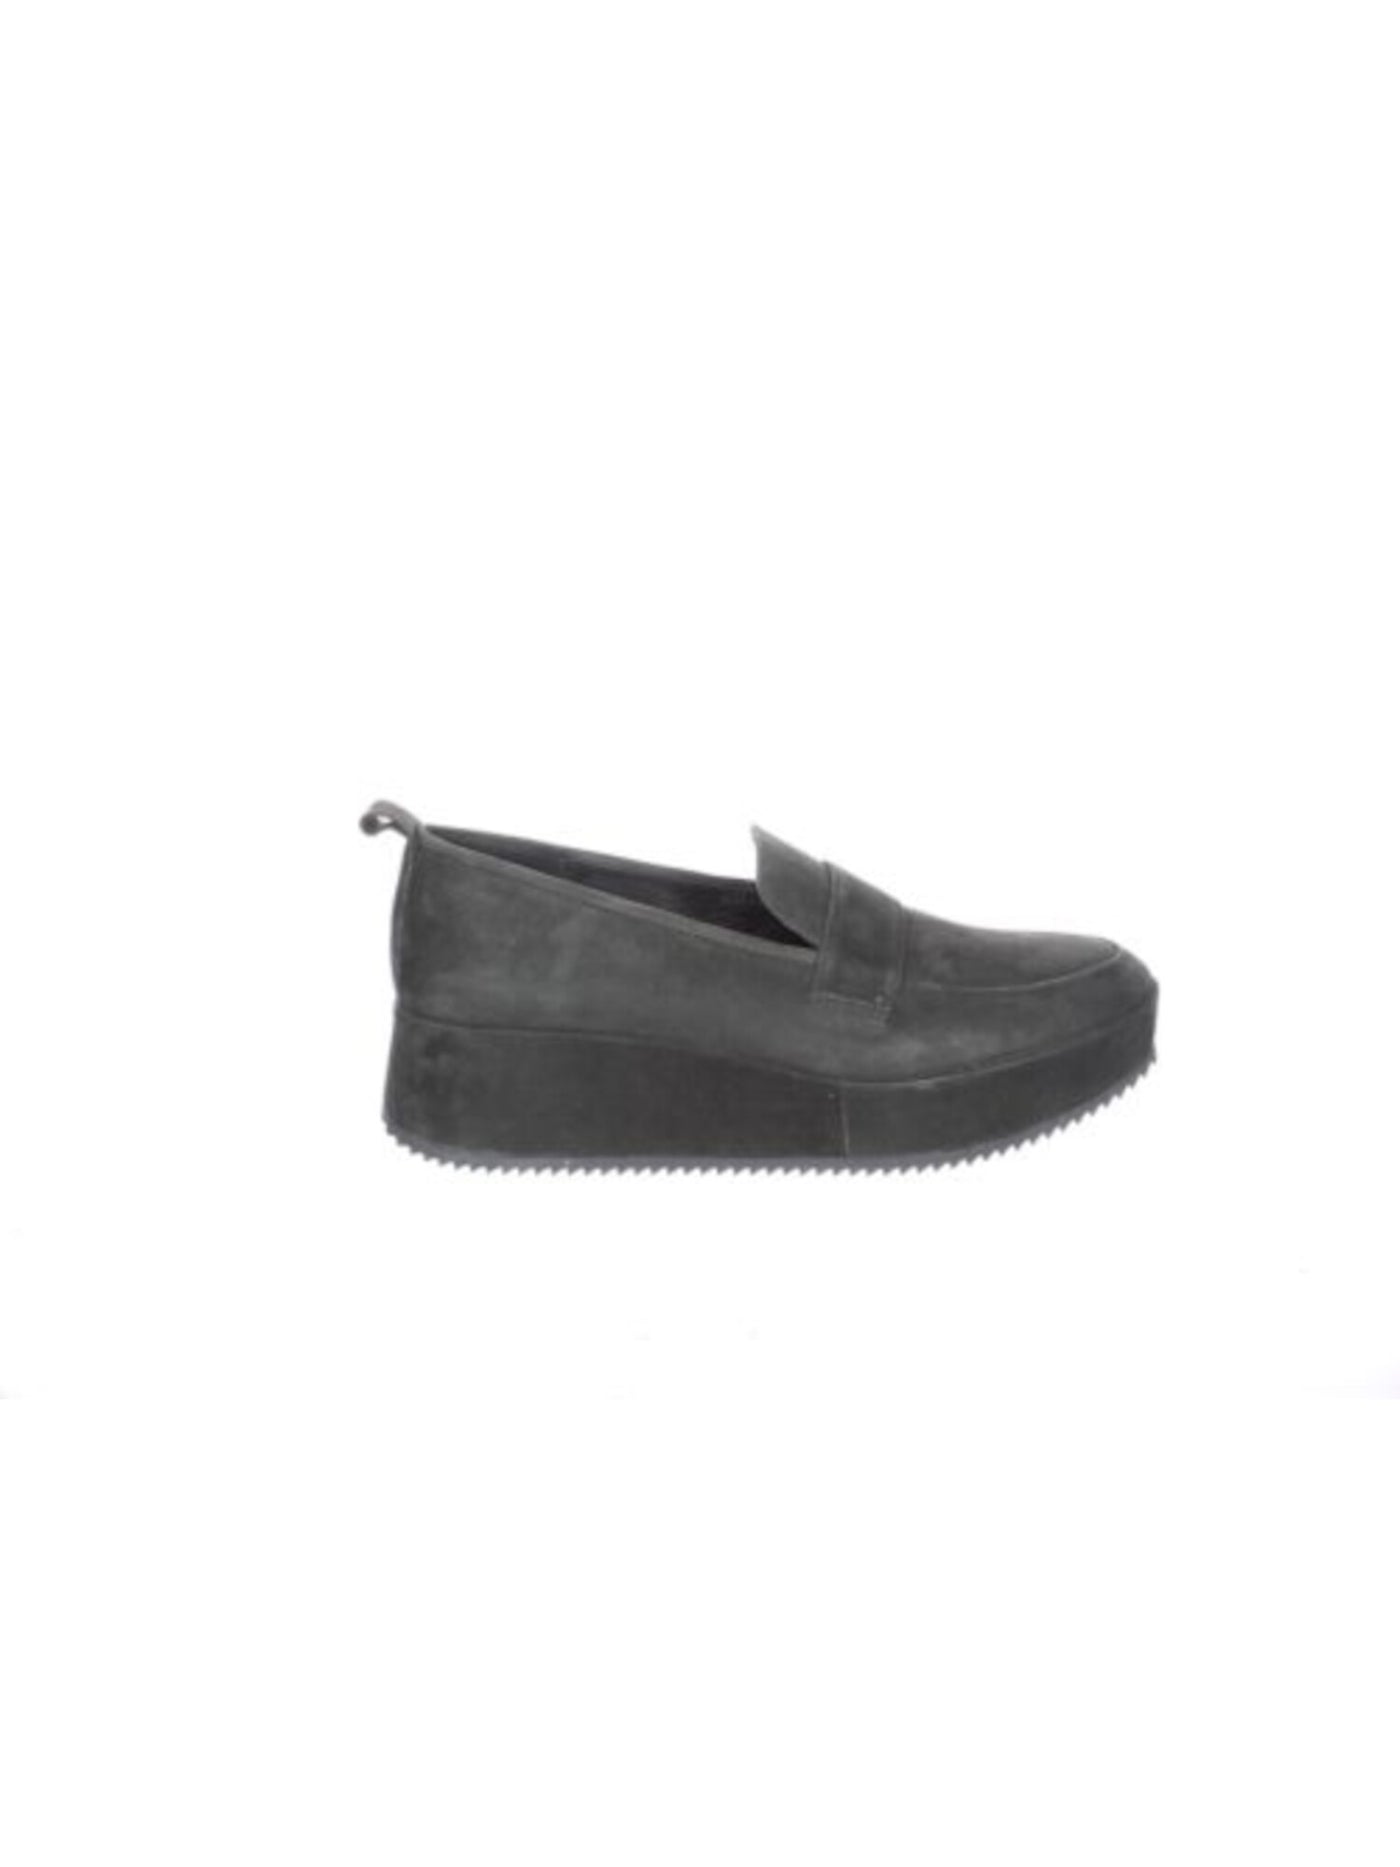 EILEEN FISHER Womens Slate Gray 1" Platform Cushioned Breathable Max Wedge Slip On Leather Heeled Loafers 8.5